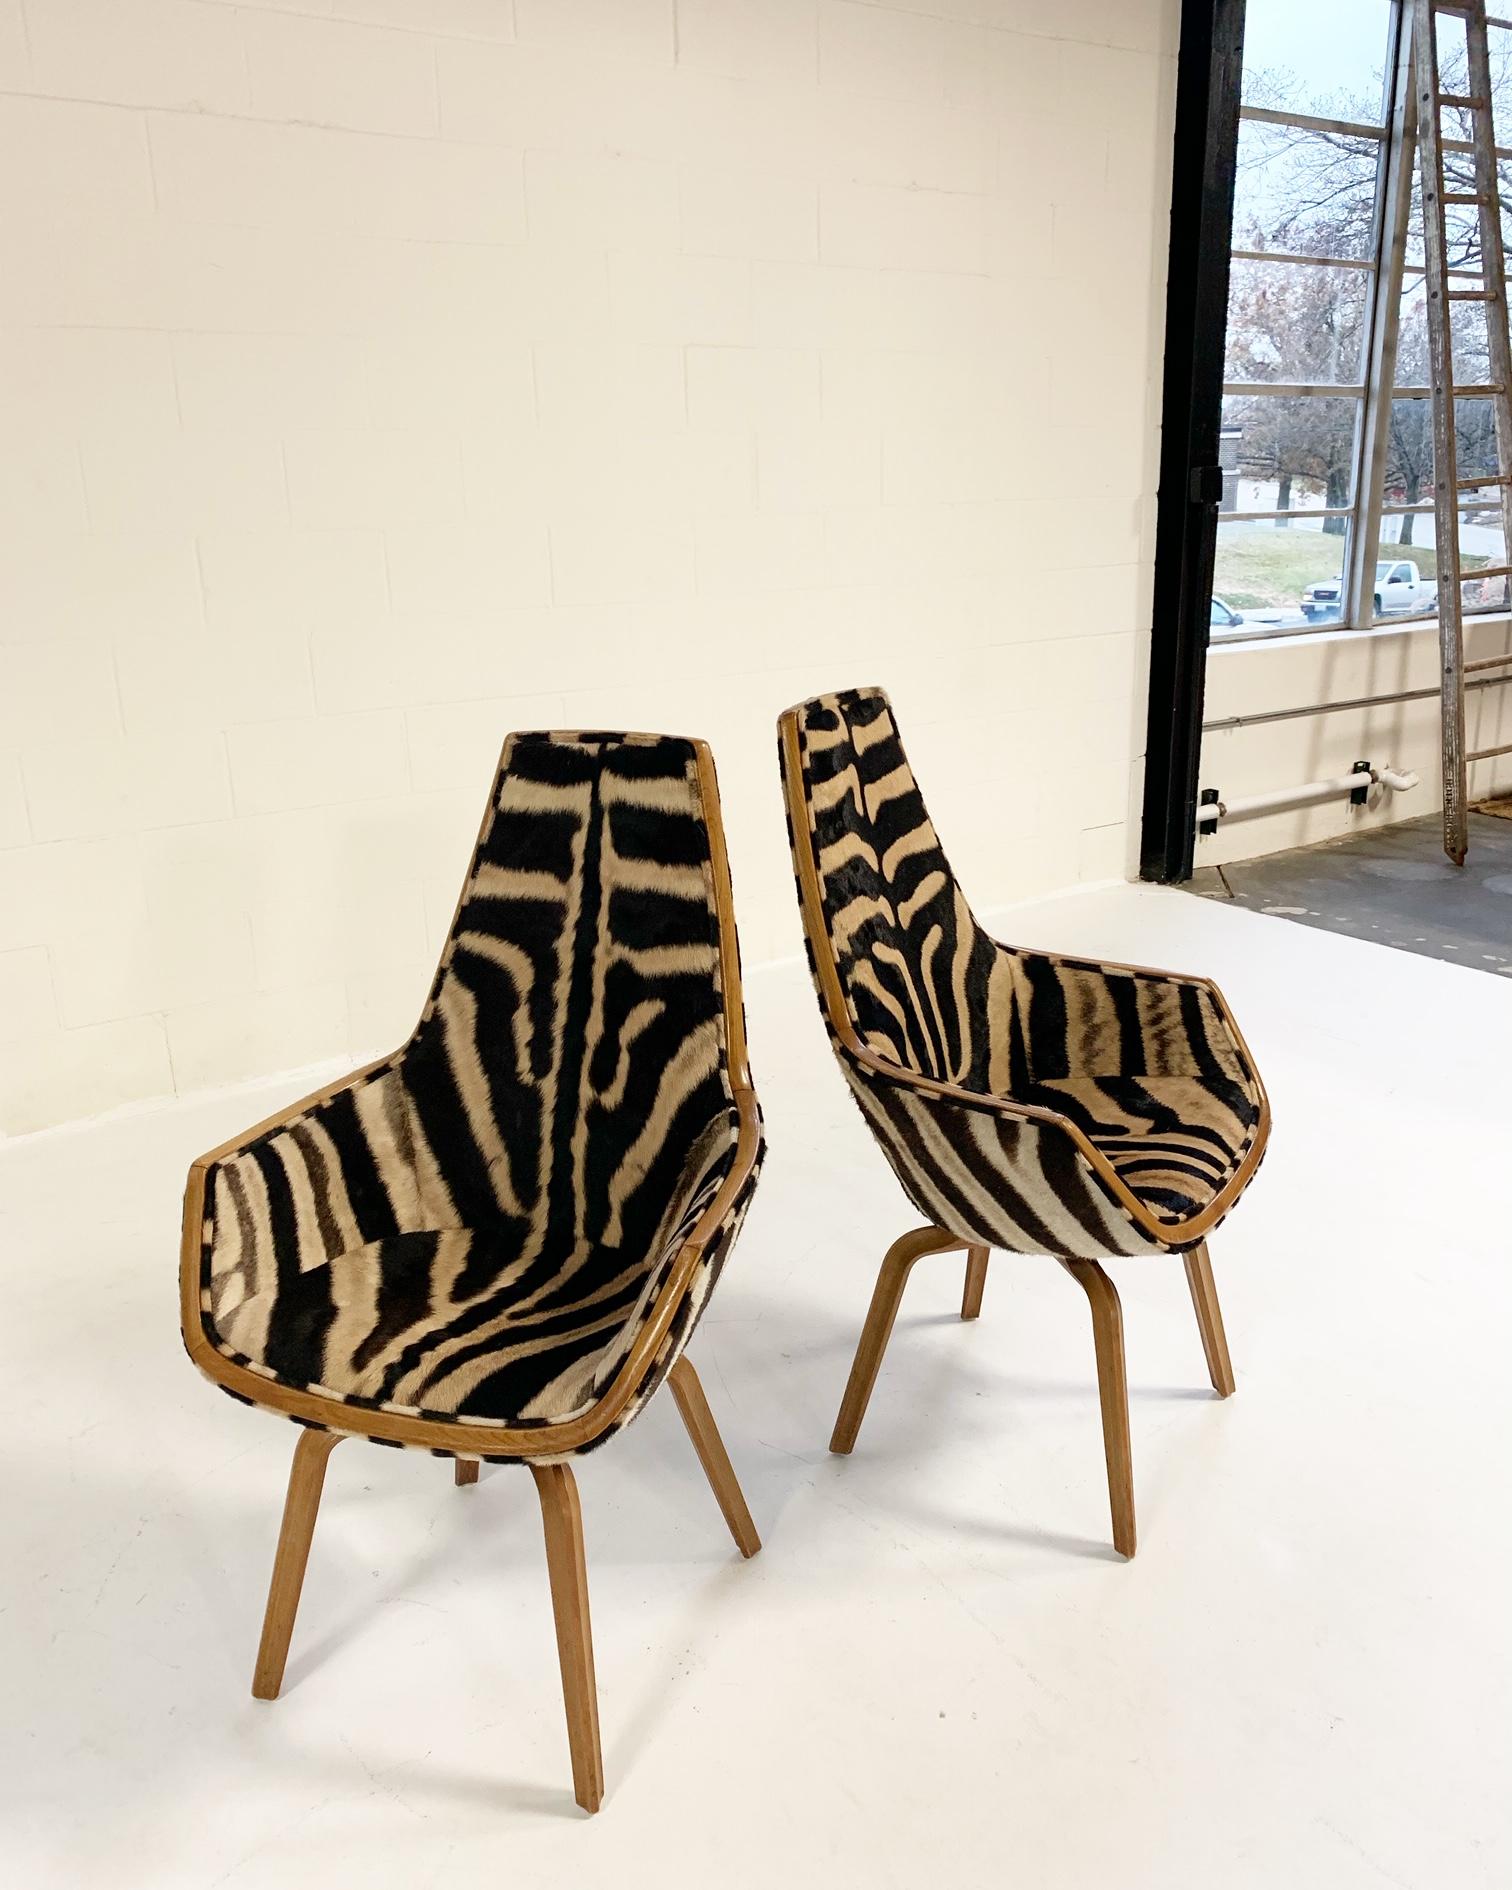 Beginning in 1956, Arne Jacobsen began his best know commission for the Royal SAS Hotel in Copenhagen. Designing the complete structure and furnishings, he created suchmodern icons as the Egg and Swan chair. The Giraffe chair, made of beech and